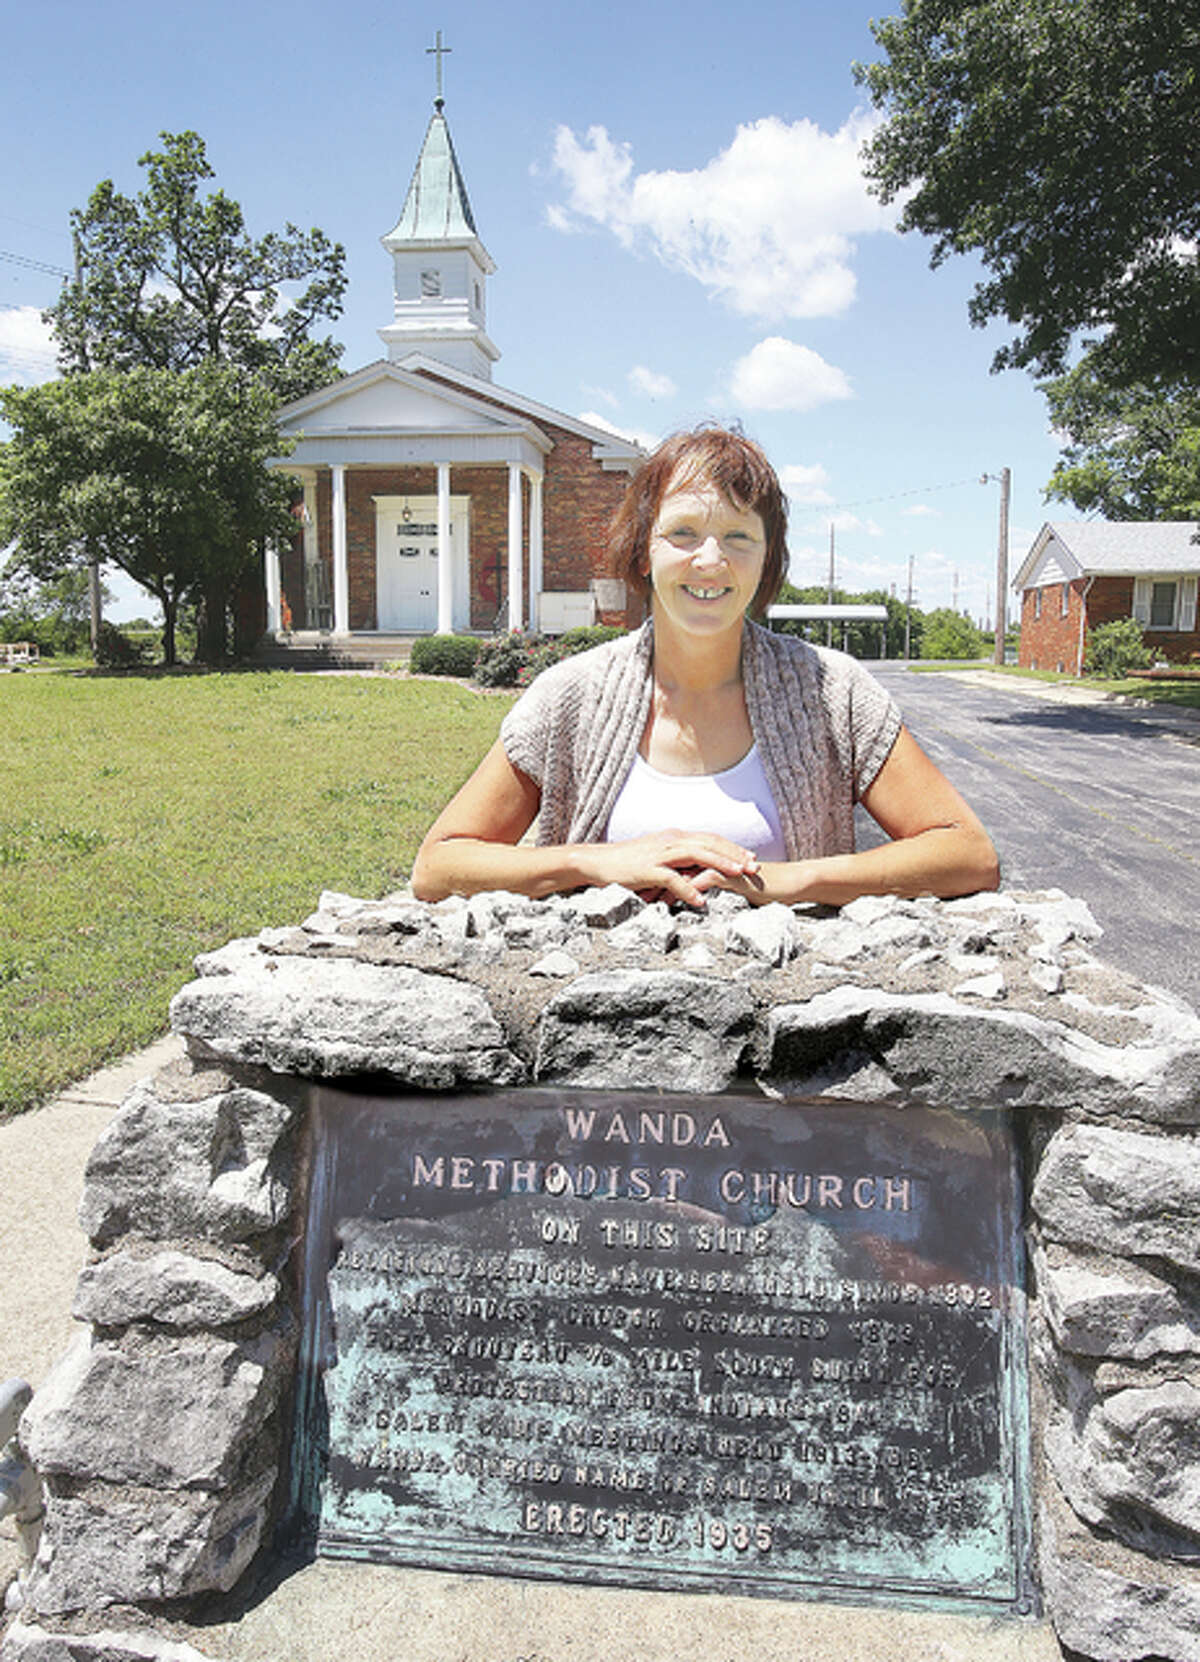 Administrative Assistant Shelly Dalton at the historic Wanda United Methodist Church located in an area known as “Wanda,” tucked away on Old Edwardsville Road, between South Roxana and Edwardsville, stands by the marker that states the church has had a church building on the same site since 1802. The current church, background, was built in 1957, but a church has stood on the same spot for more than 200 years.